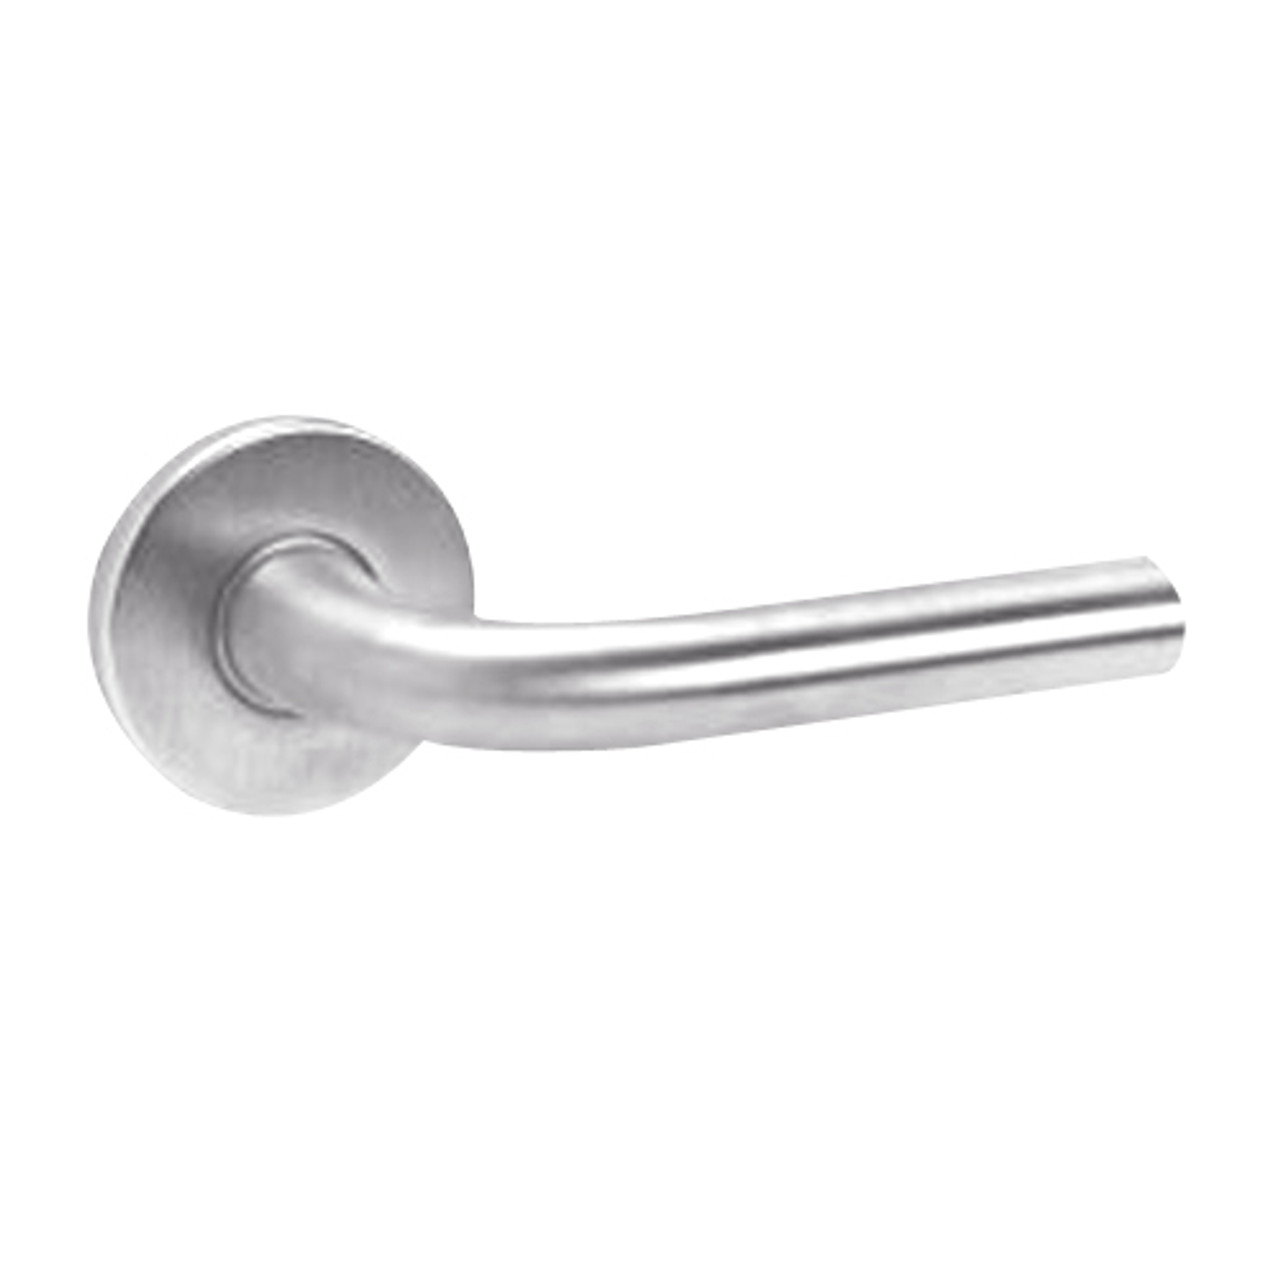 ML2032-RWF-629-M31 Corbin Russwin ML2000 Series Mortise Institution Trim Pack with Regis Lever in Bright Stainless Steel